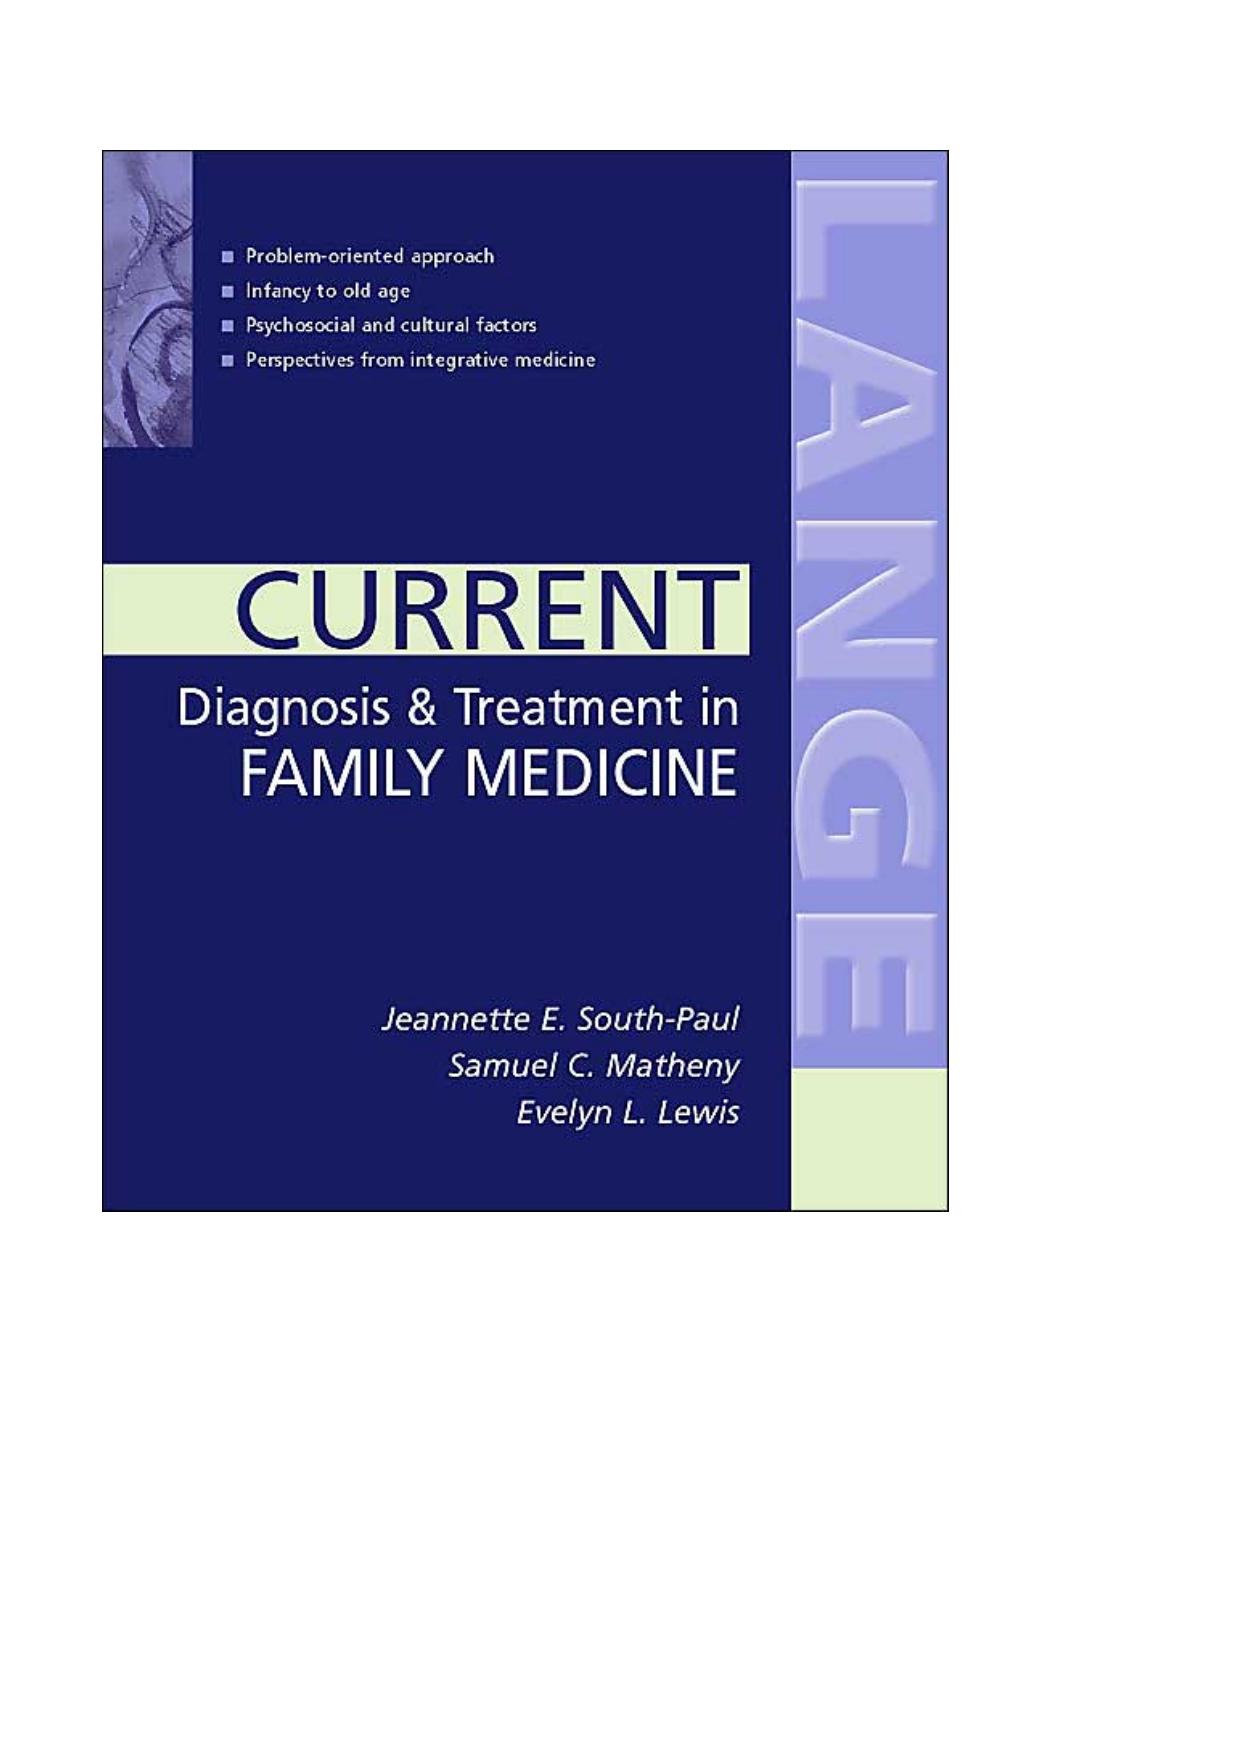 Current Diagnosis & Treatment in Family Medicine 2007